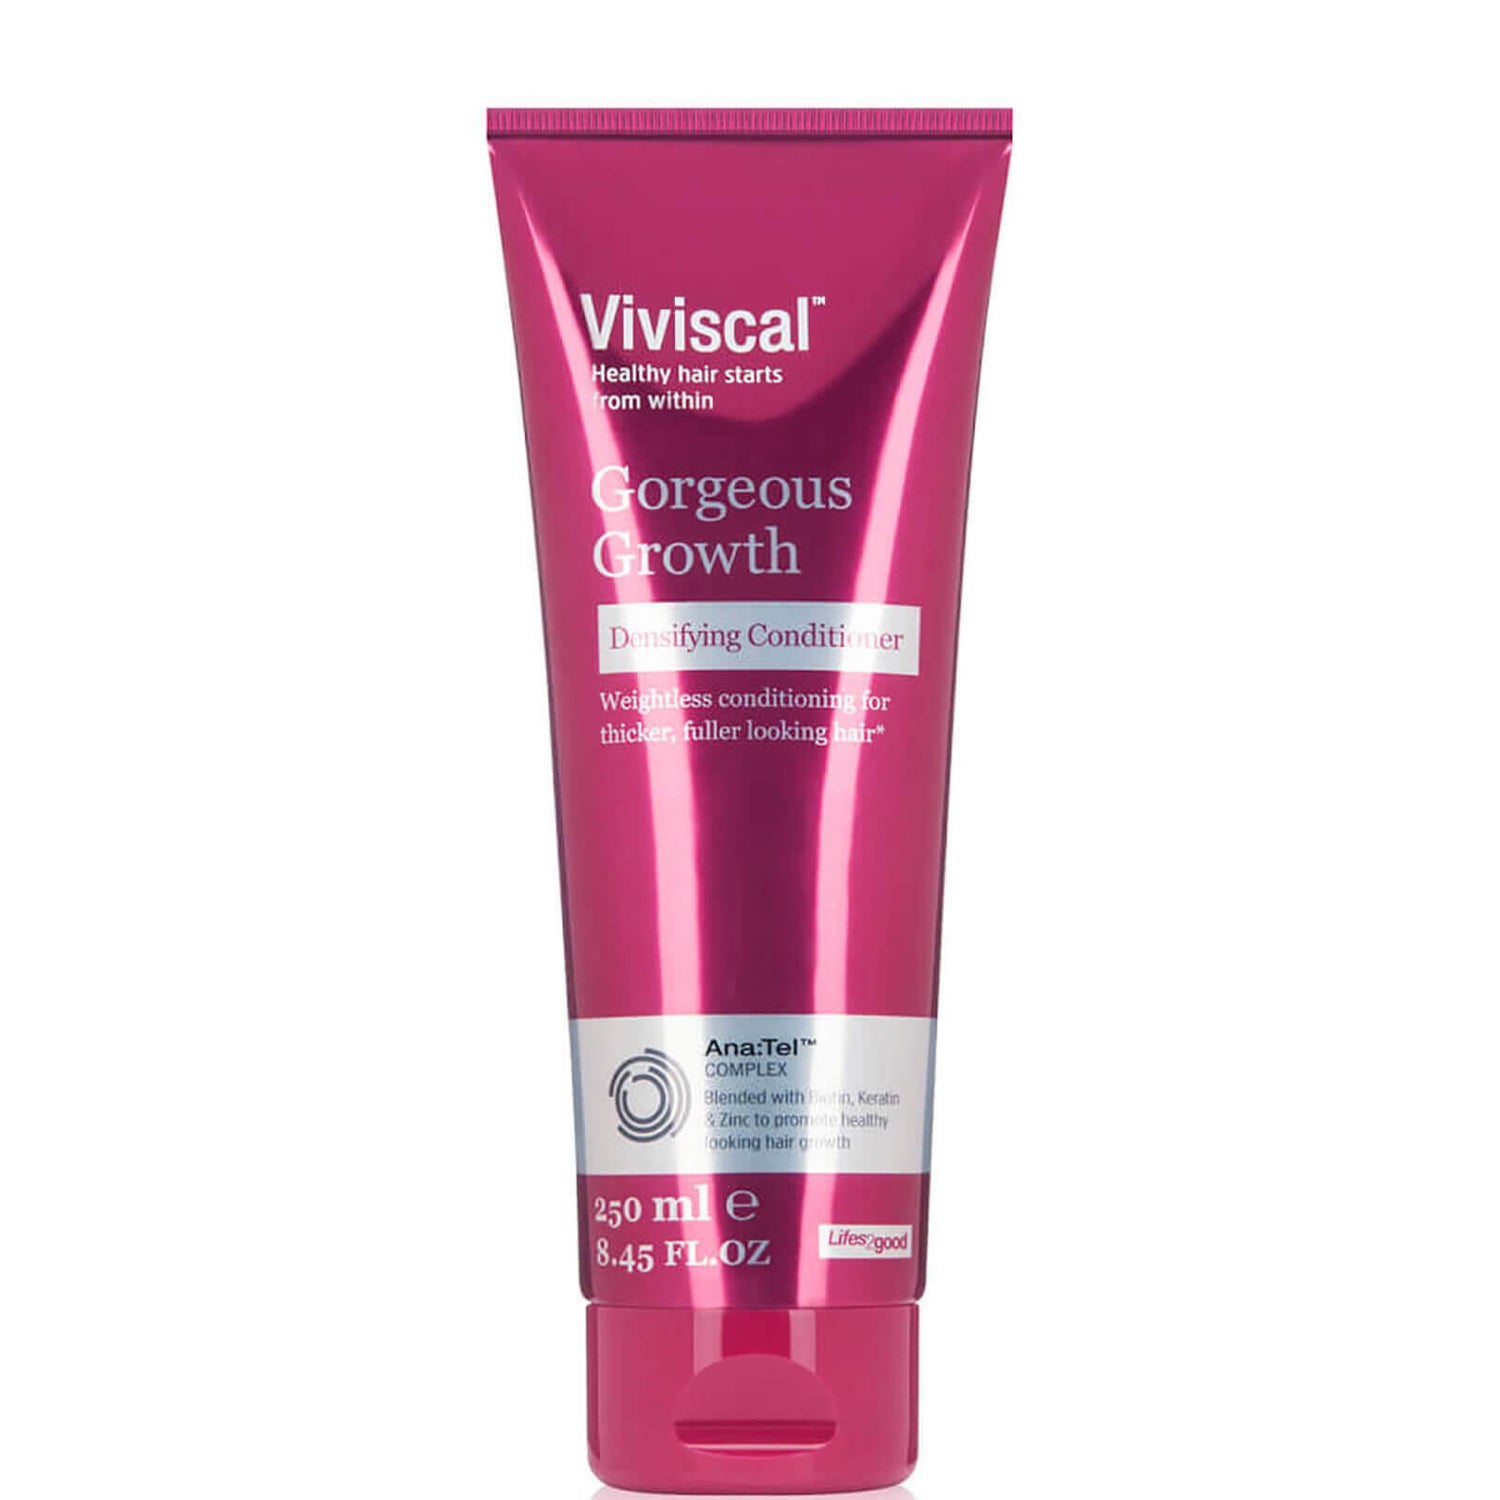 Viviscal Gorgeous Densifying Proprietary Complex Conditioner for Fuller/Thicker Hair with Keratin, Biotin and Zinc 250ml